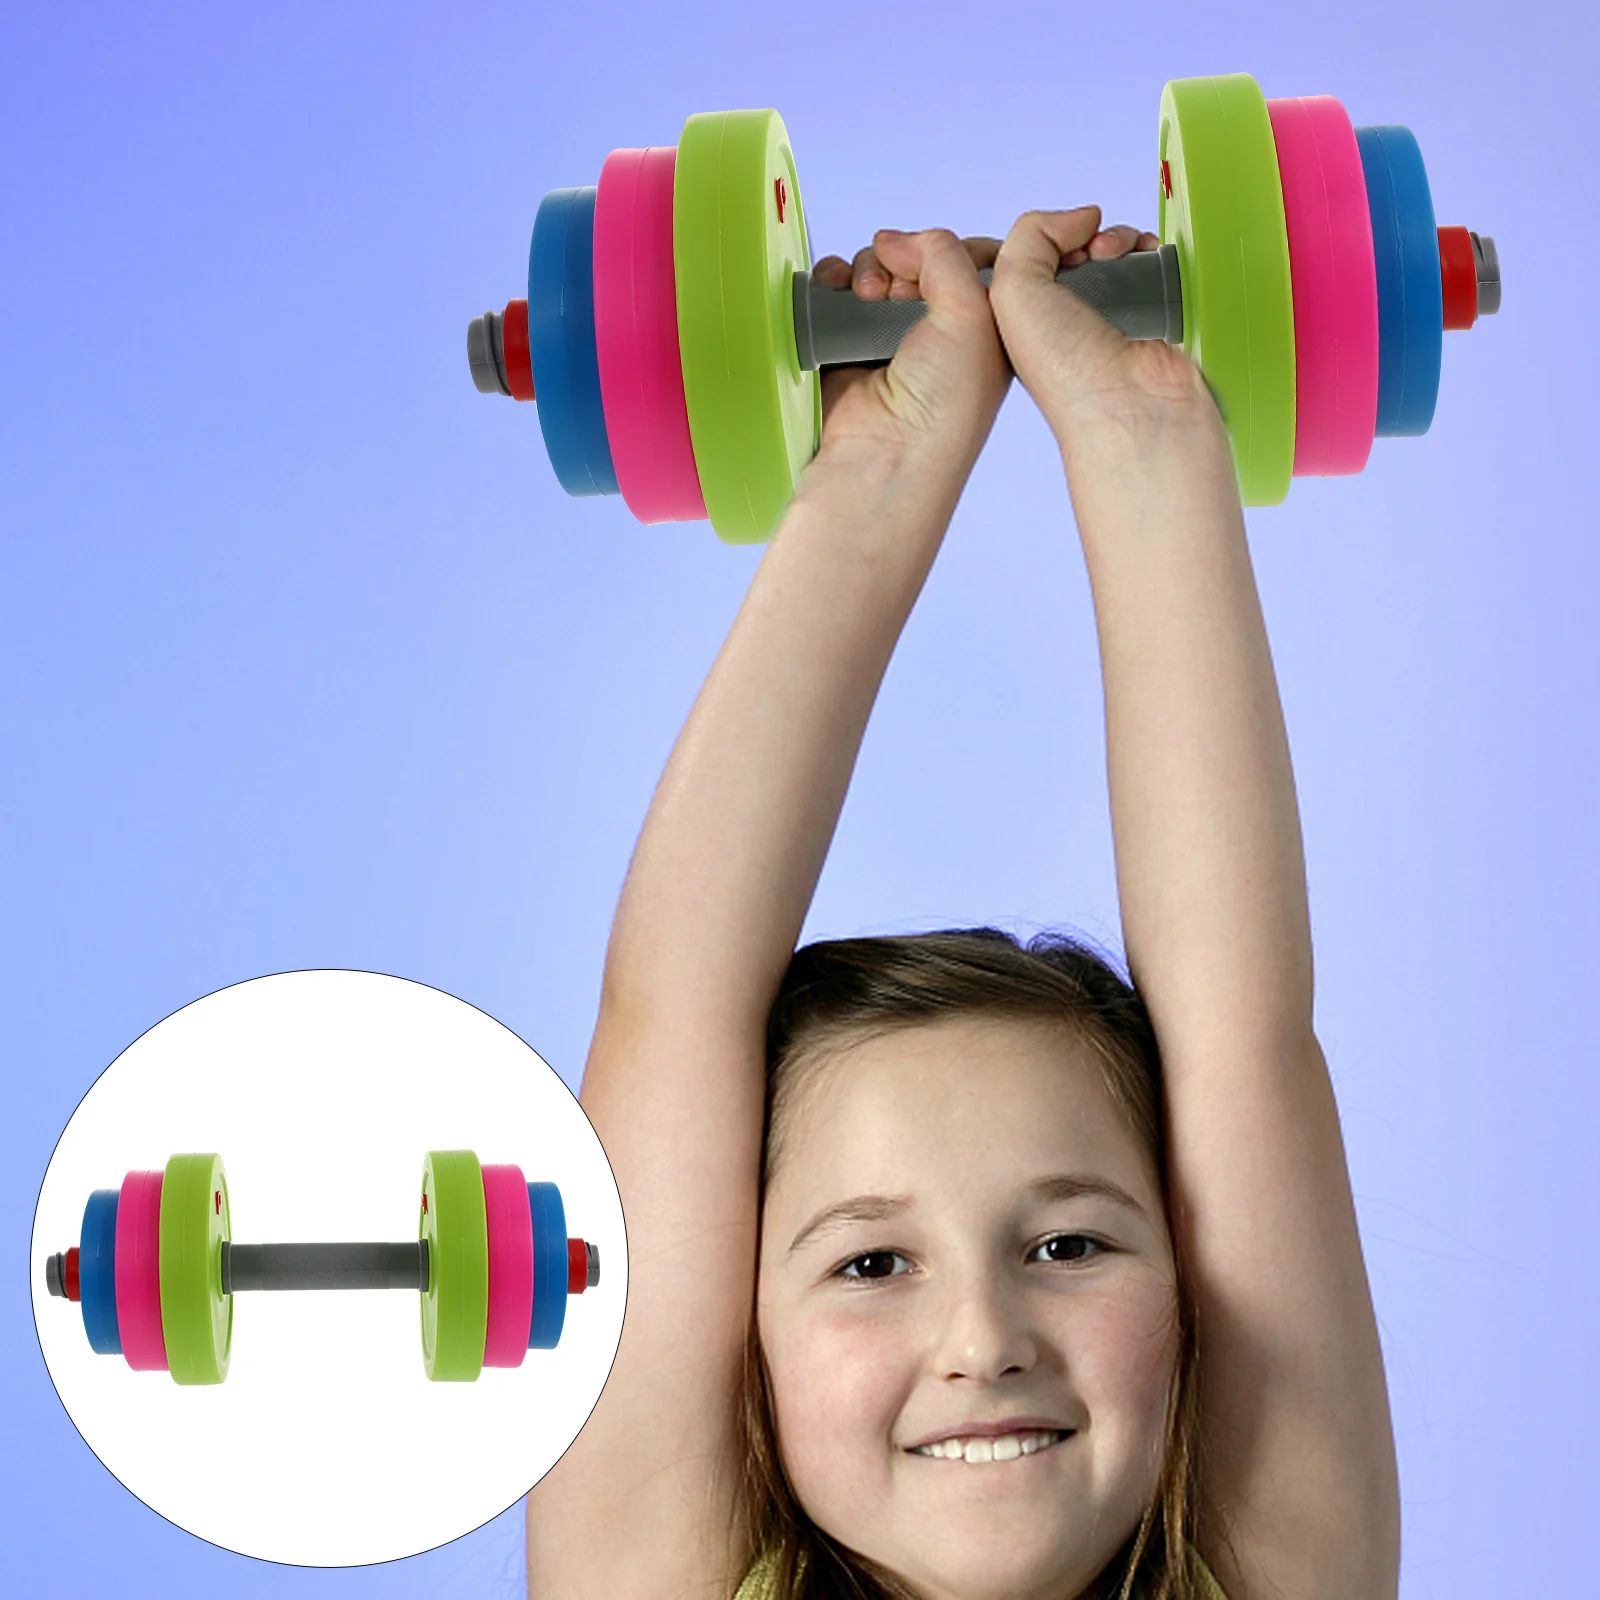 

Dumbbel Kids Suit Training Dumbbell Adorable Toy Photo Fitness Prop Cast Iron Barbell Child Children Creative